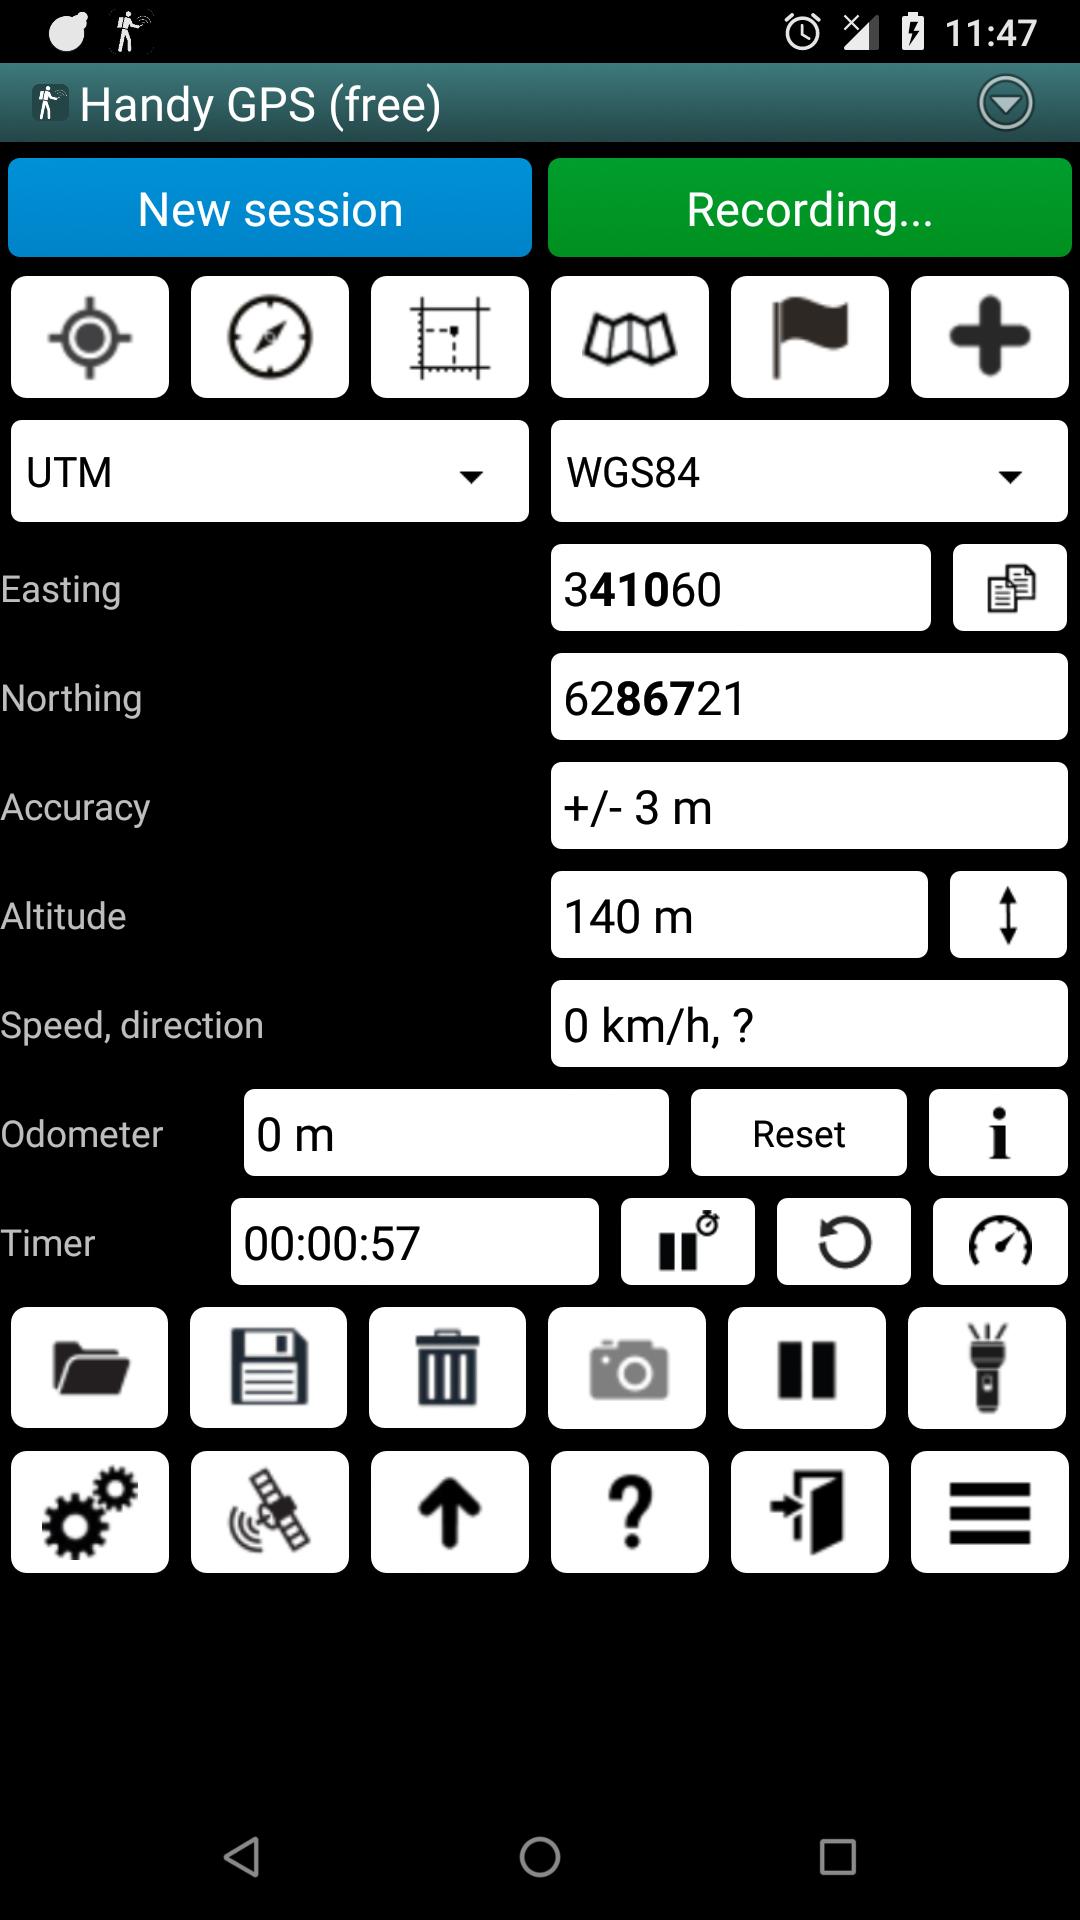 Handy GPS (free) for Android - APK Download